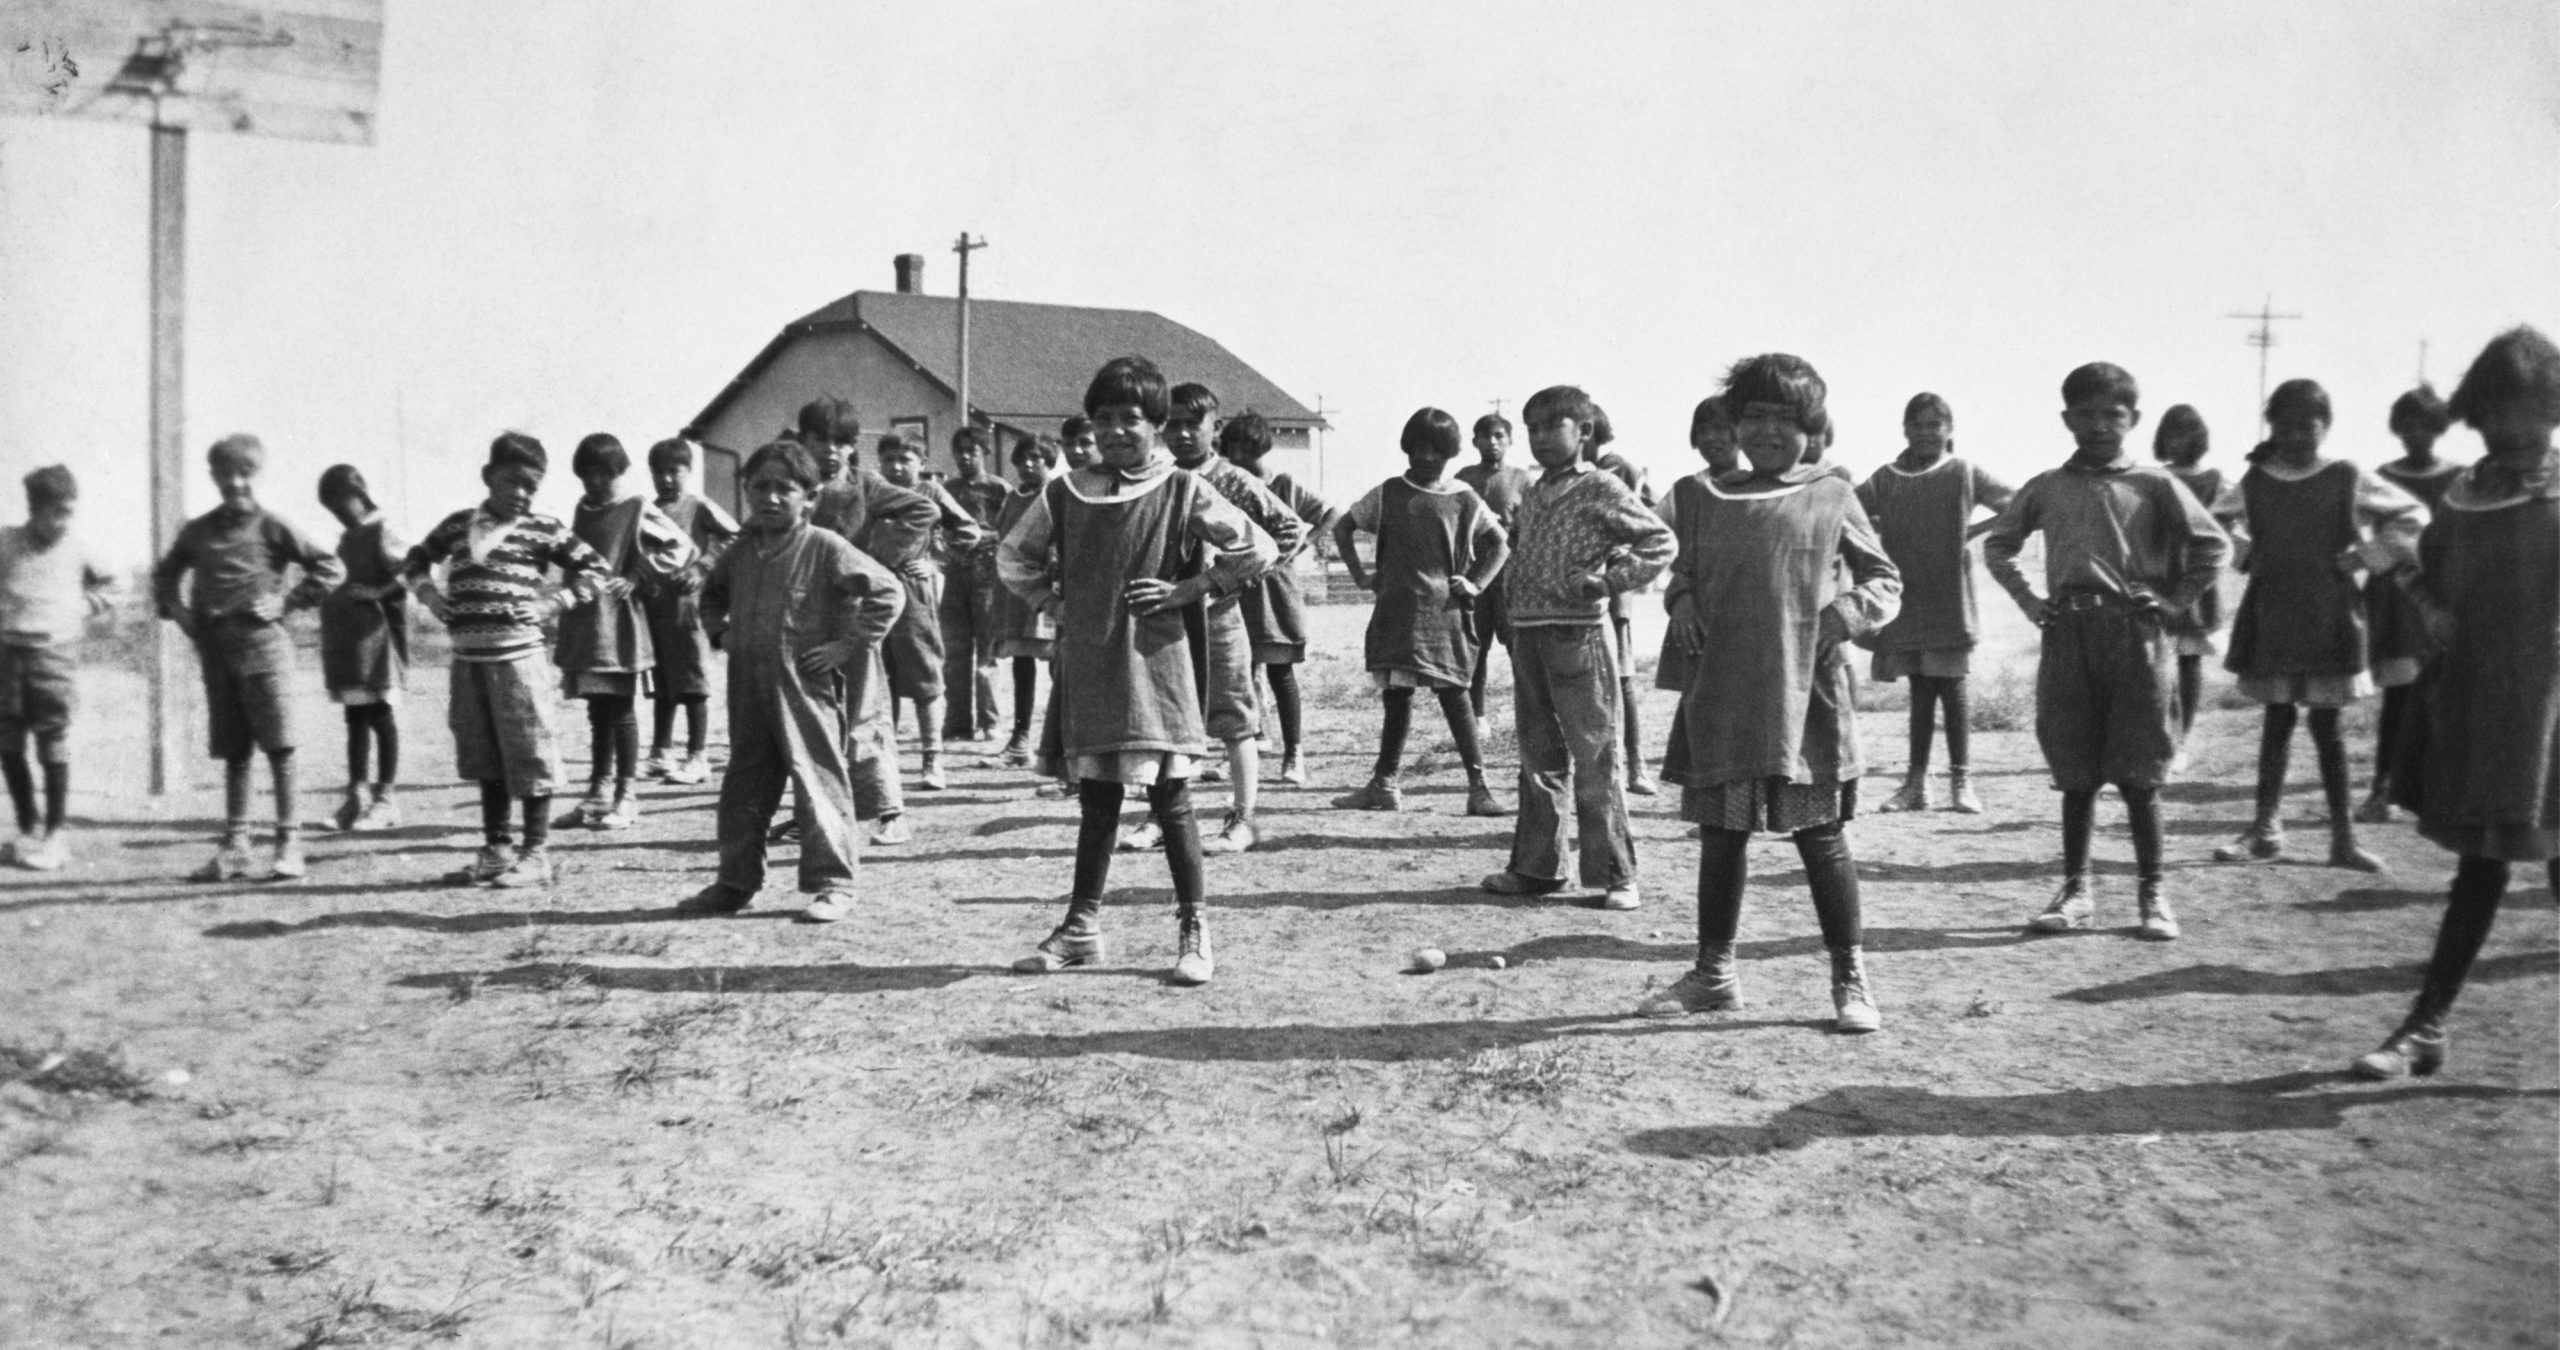 Group of Indigenous children in yard with hands on hips, building in background.